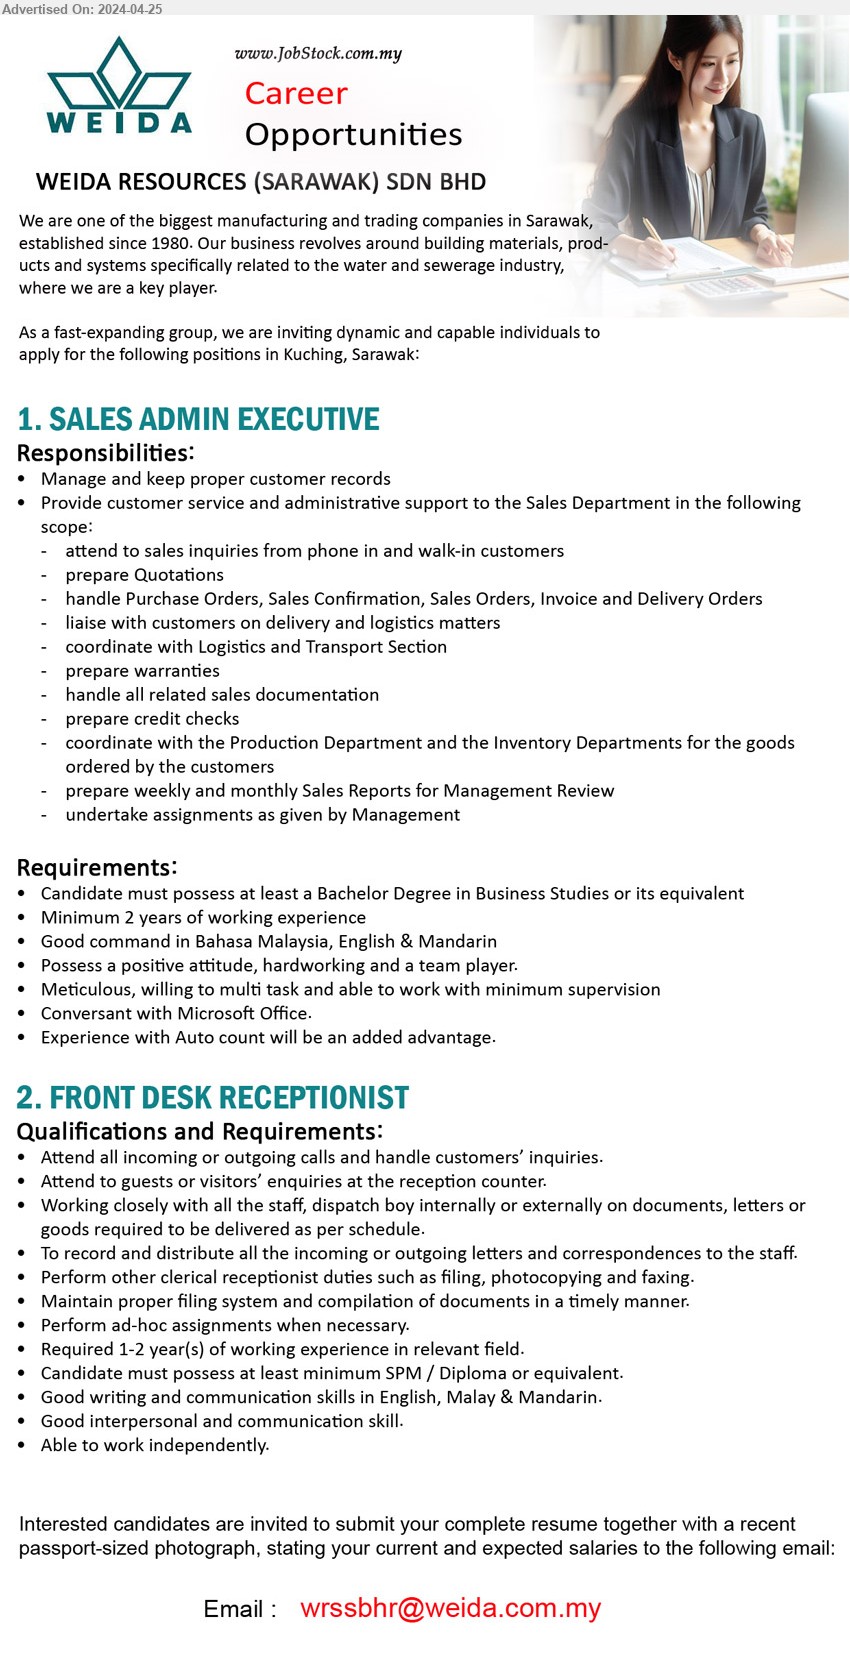 WEIDA RESOURCES (SARAWAK) SDN BHD - 1. SALES ADMIN EXECUTIVE  (Kuching), Bachelor Degree in Business Studies, Experience with Auto count will be an added advantage.,...
2. FRONT DESK RECEPTIONIST (Kuching), SPM / Diploma, Good interpersonal and communication skill,...
Email resume to ...